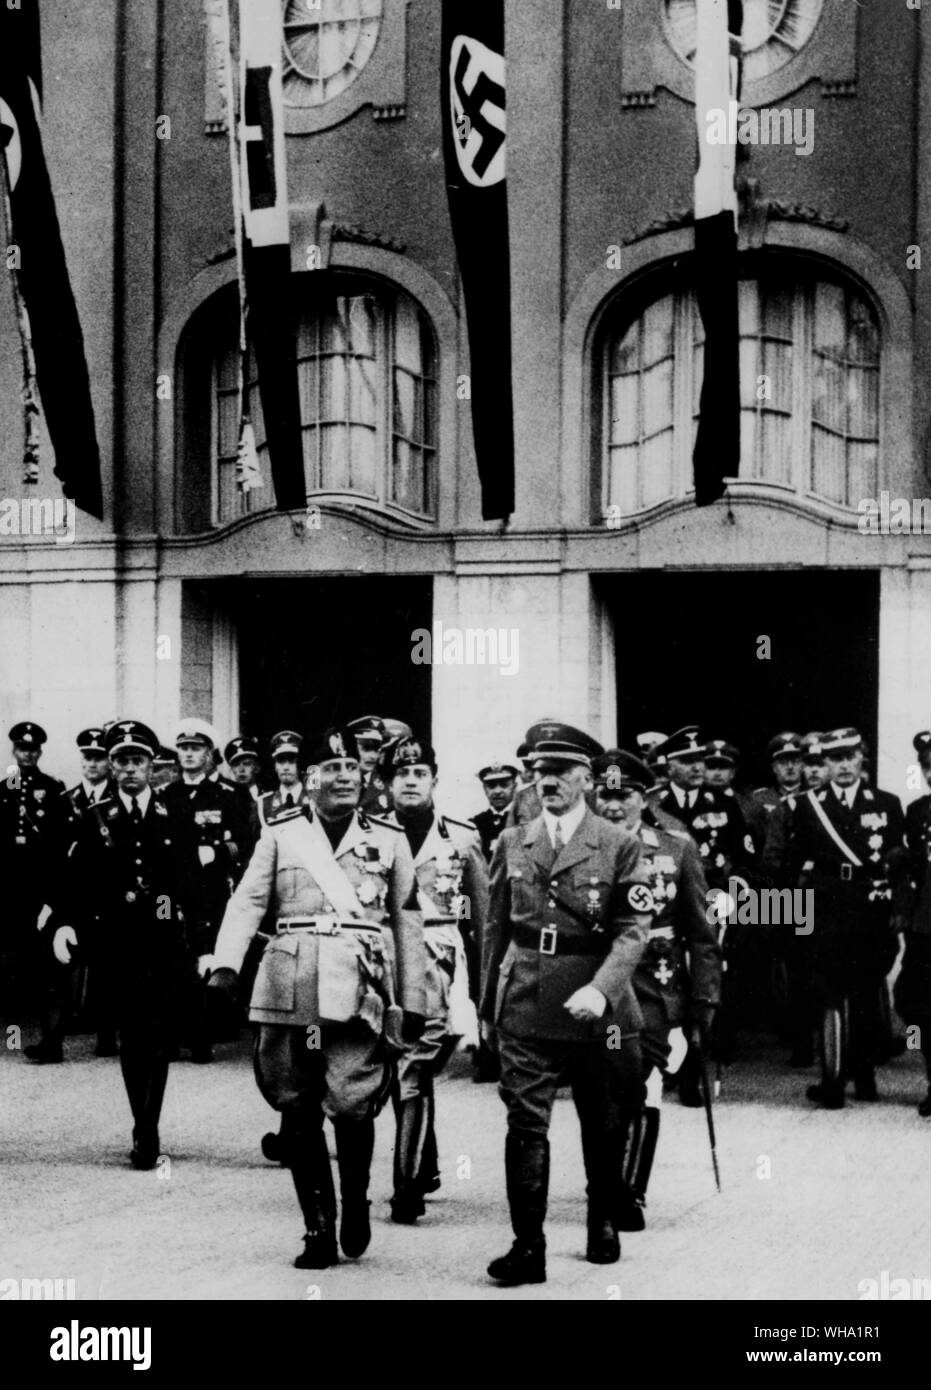 28th September 1937: Benito Mussolini (l) with Adolf Hitler (r) in Berlin. Mussolini is followed by his son-in-law, Count Ciano and Hitler is followed by General Goering. Stock Photo